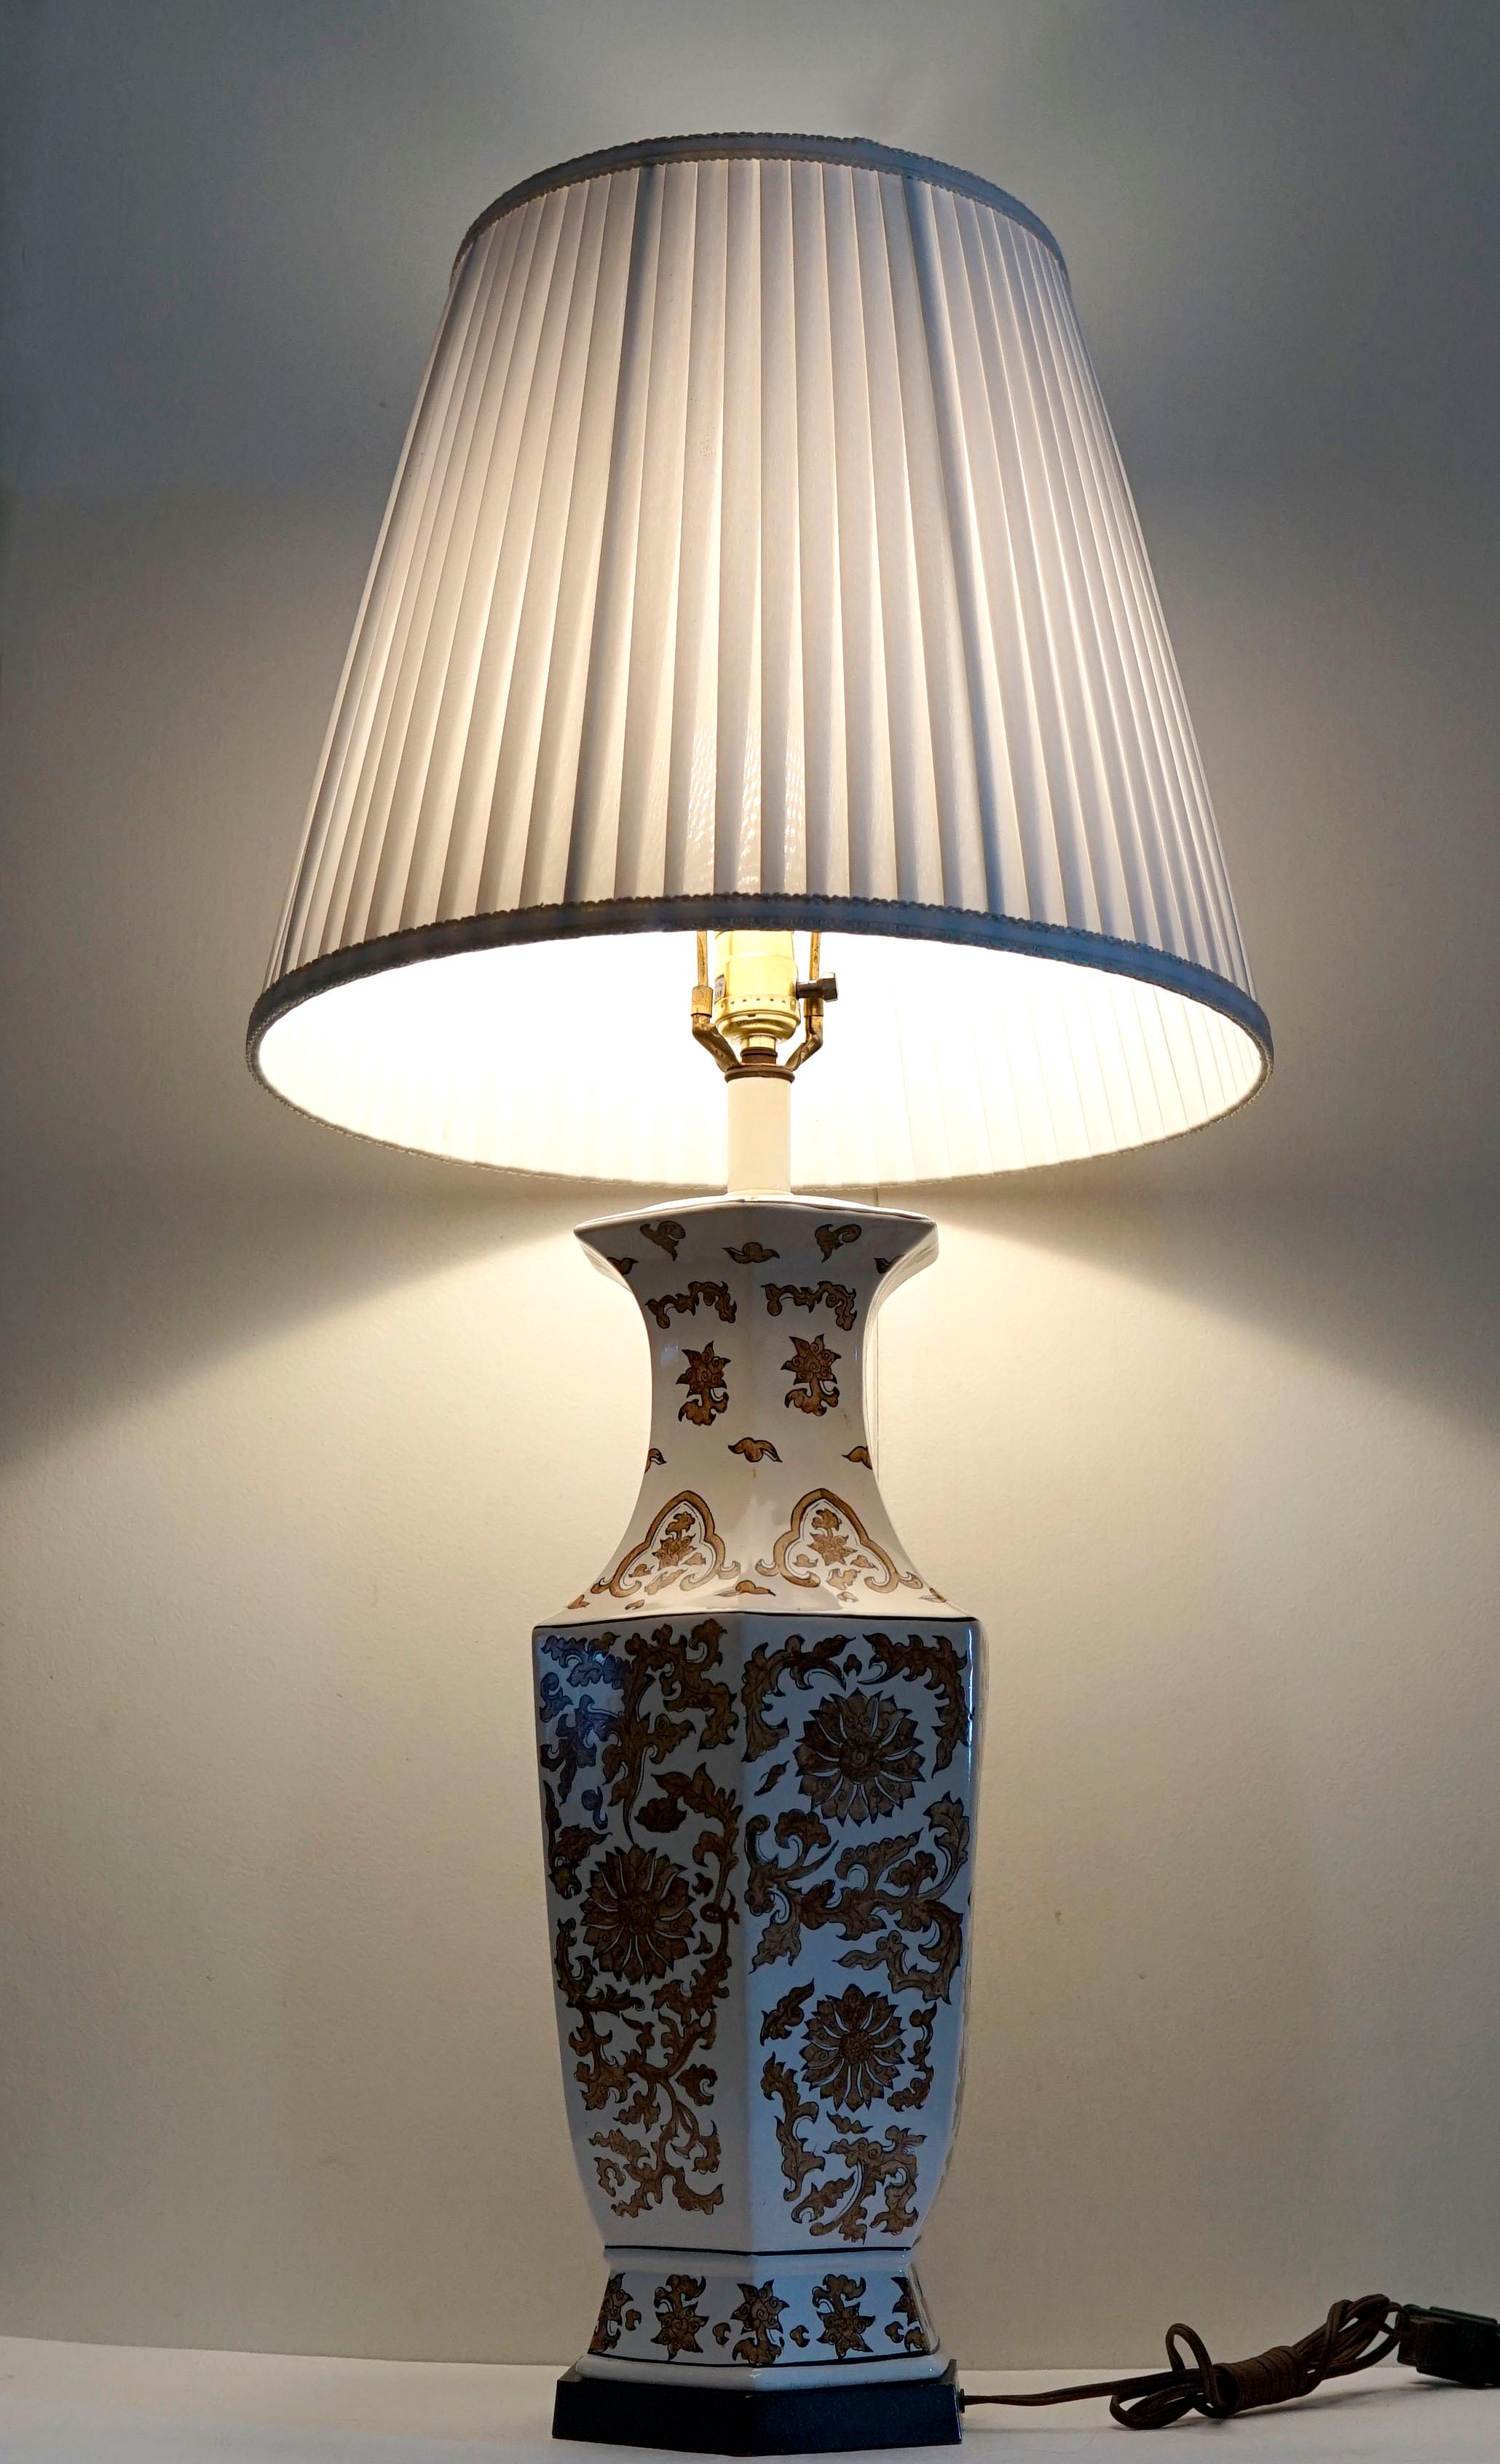 The hexagon shape and the elegant design of floral and botannical elements make this lamp a standout on a white background. The lamp is in beautiful condition without condition issues. The hexagon shape is architectural and the lamp makes a dramatic